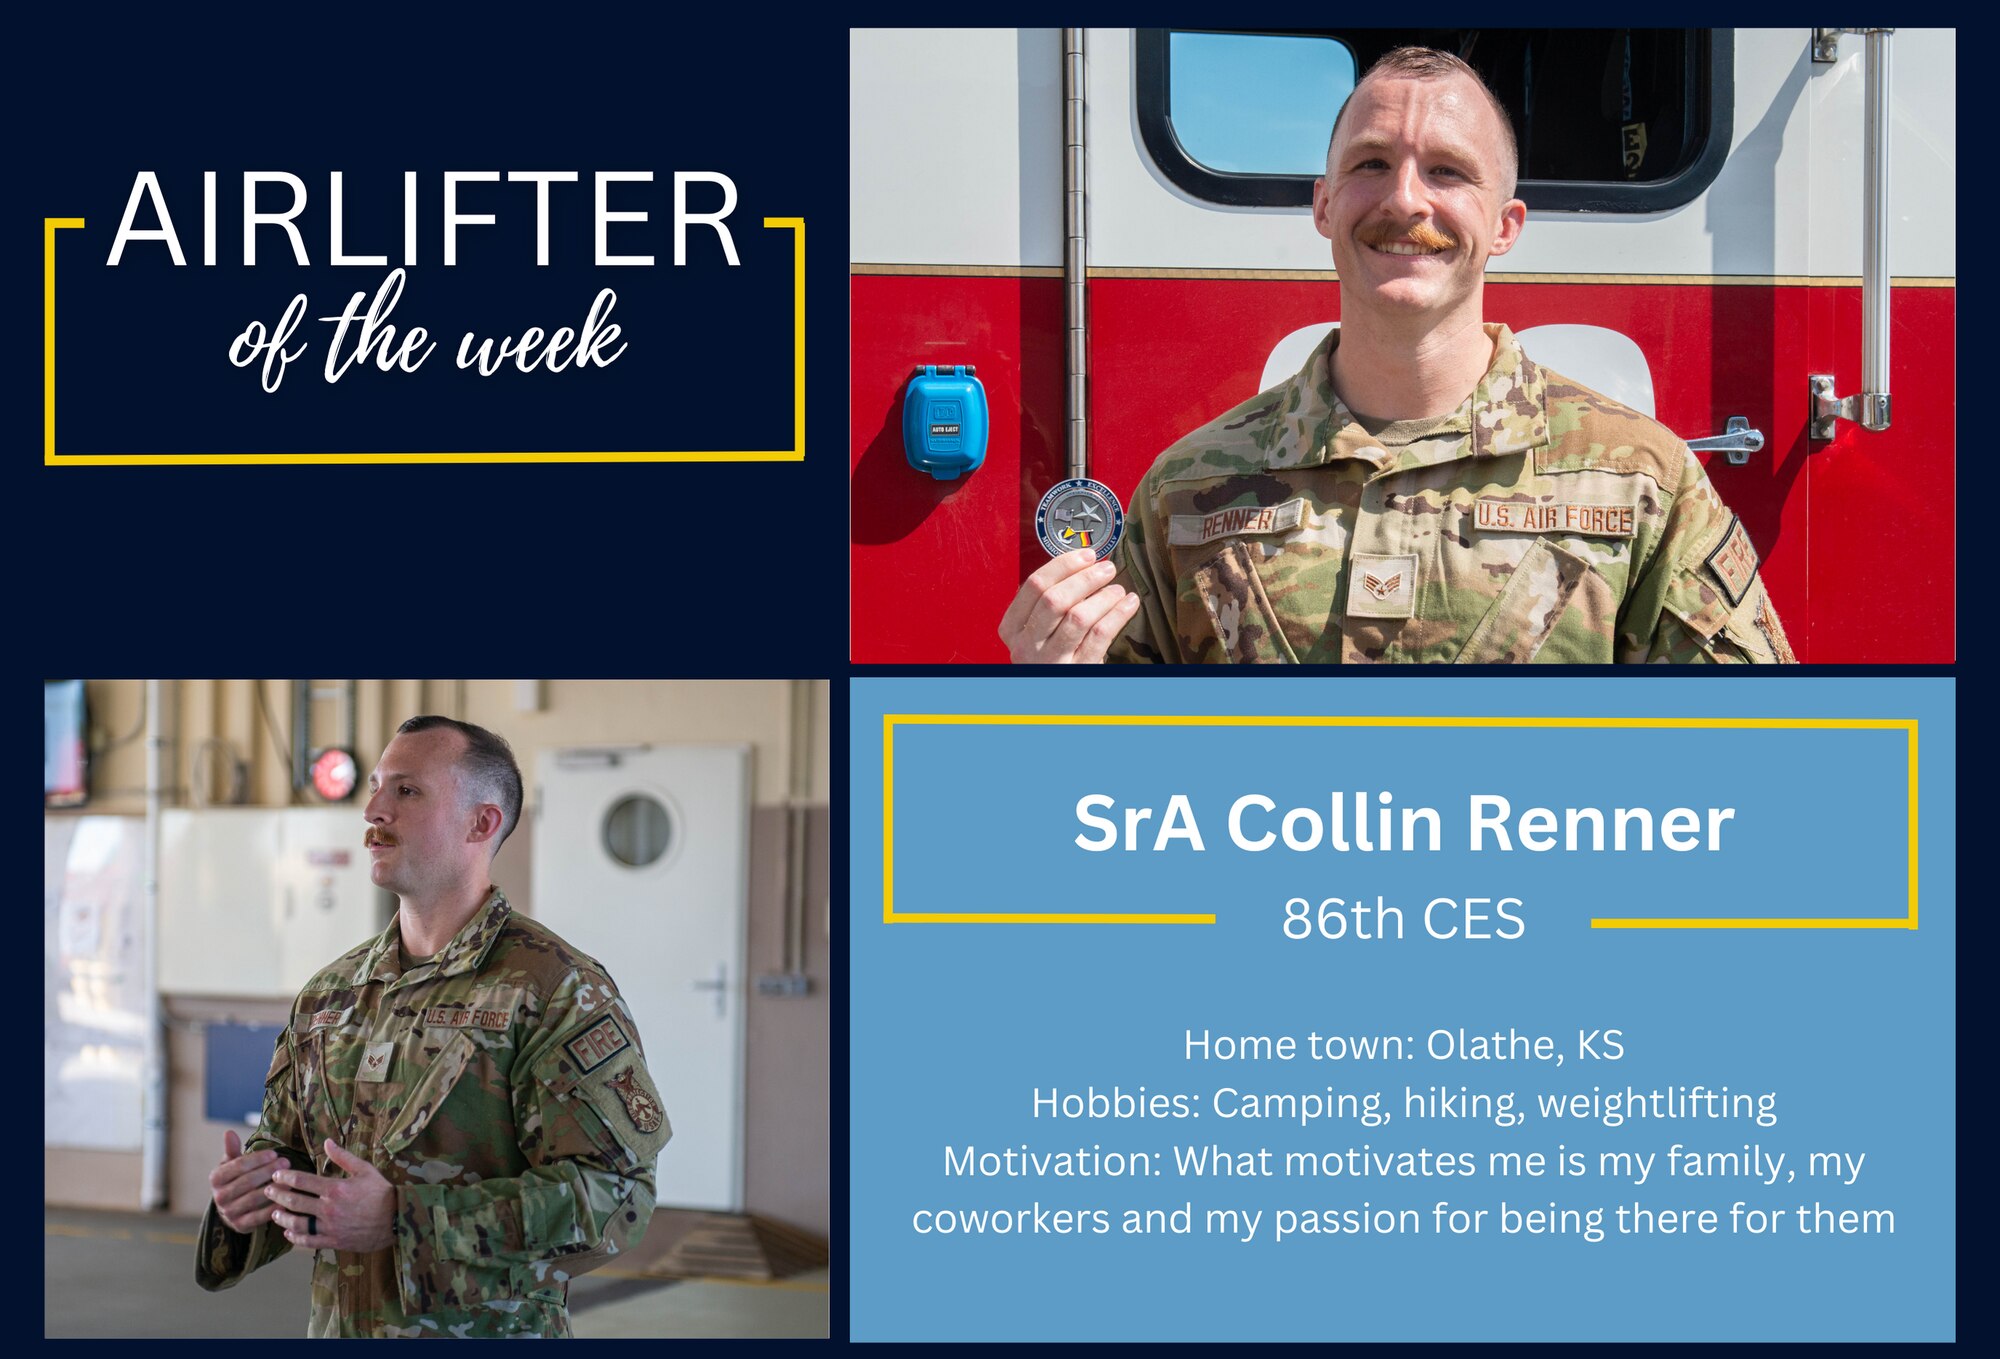 Senior Airman Collin Renner was recognized as the Airlifter of the Week